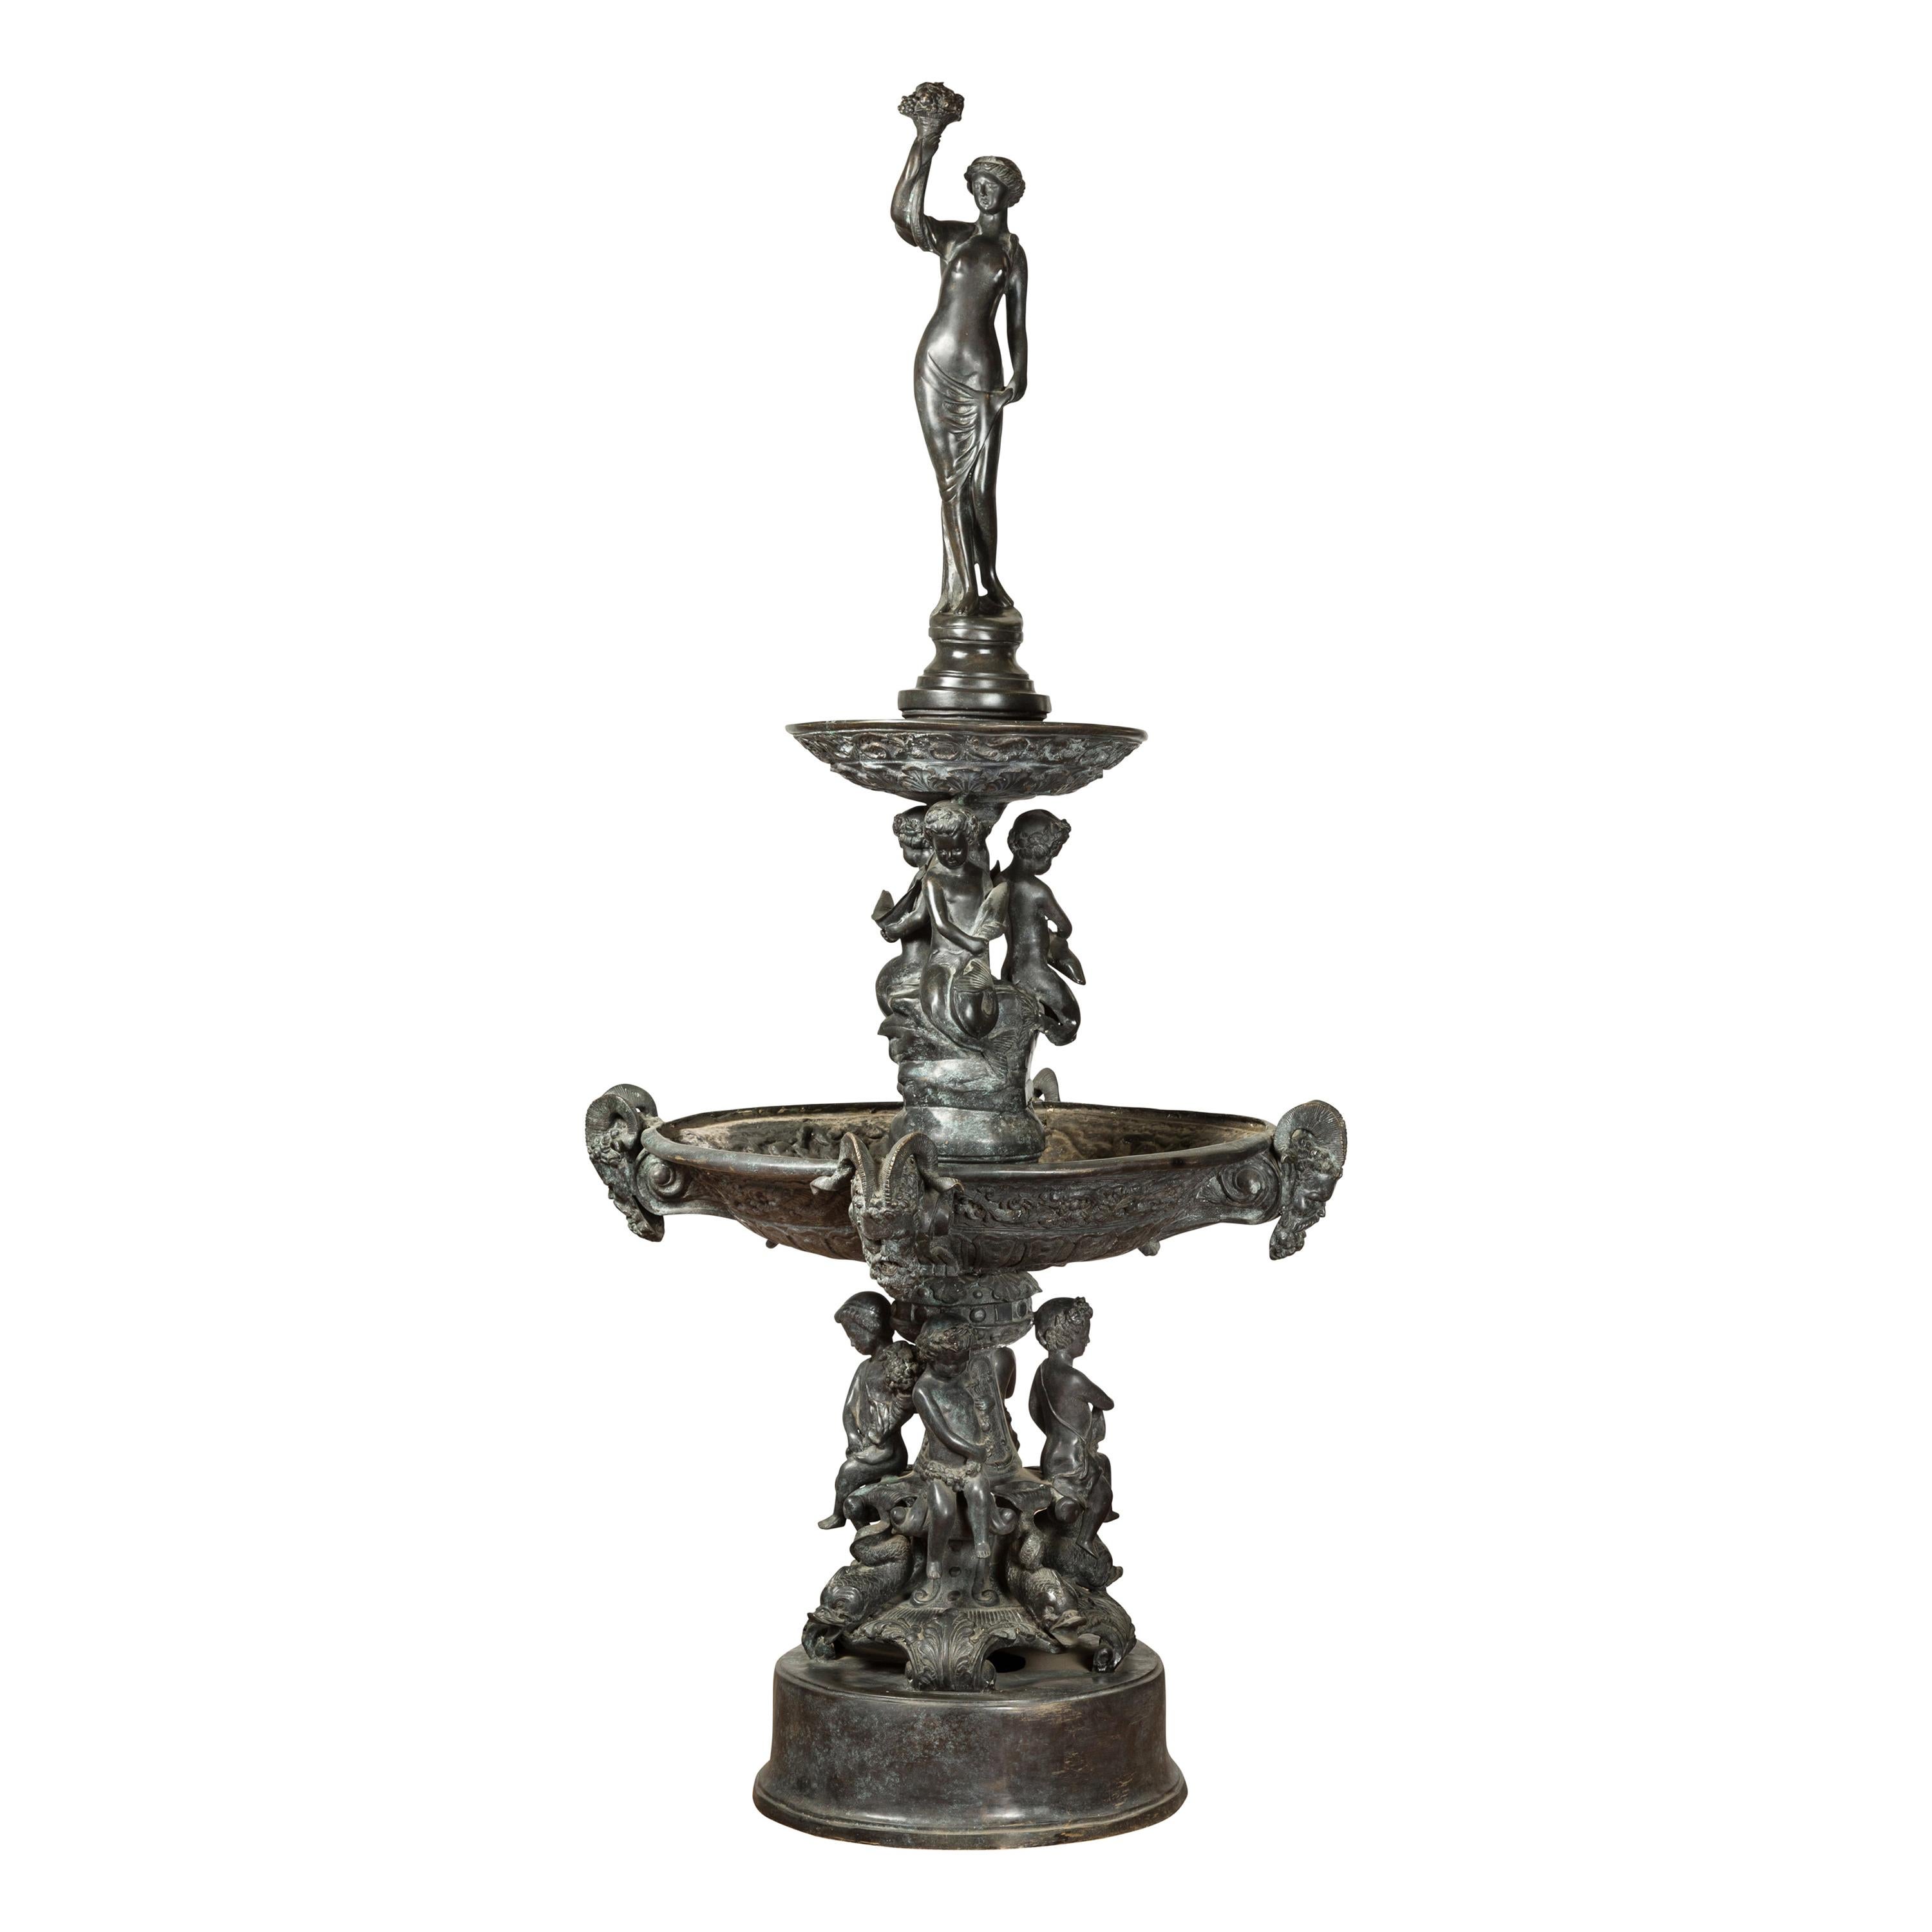 Vintage Greco-Roman Style Cast Bronze Fountain with Nymph, Tritons and Putti